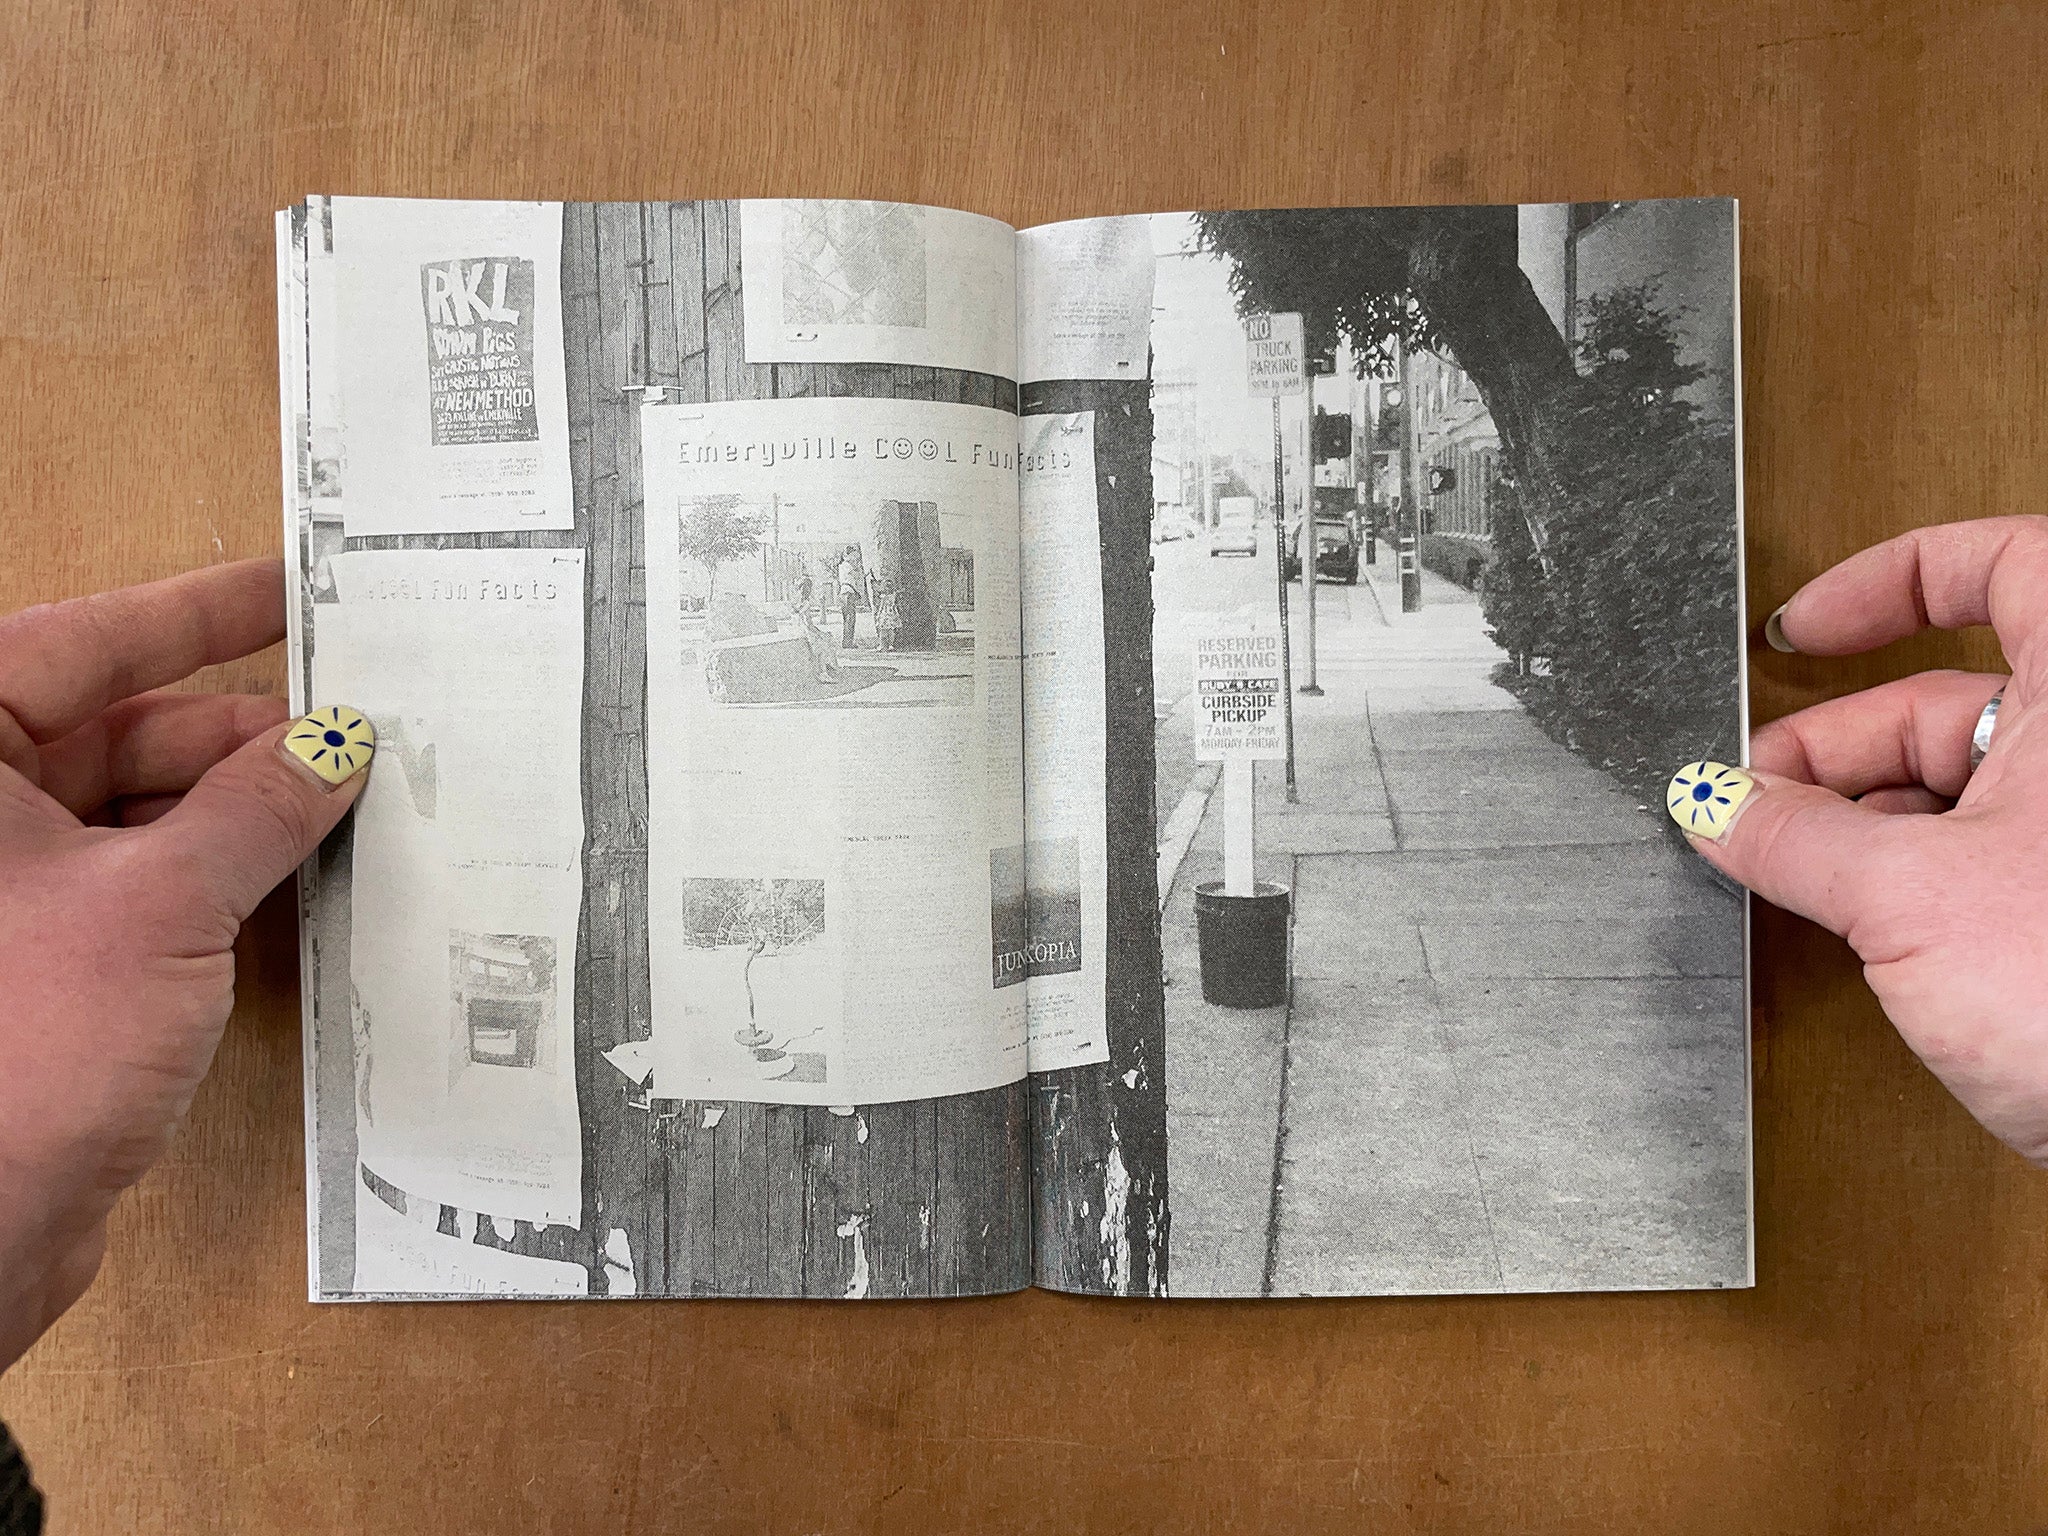 EMERYVILLE COOL FUN BOOKLET: CURRENT EDITIONS NO. 8 by Jessalyn Aaland